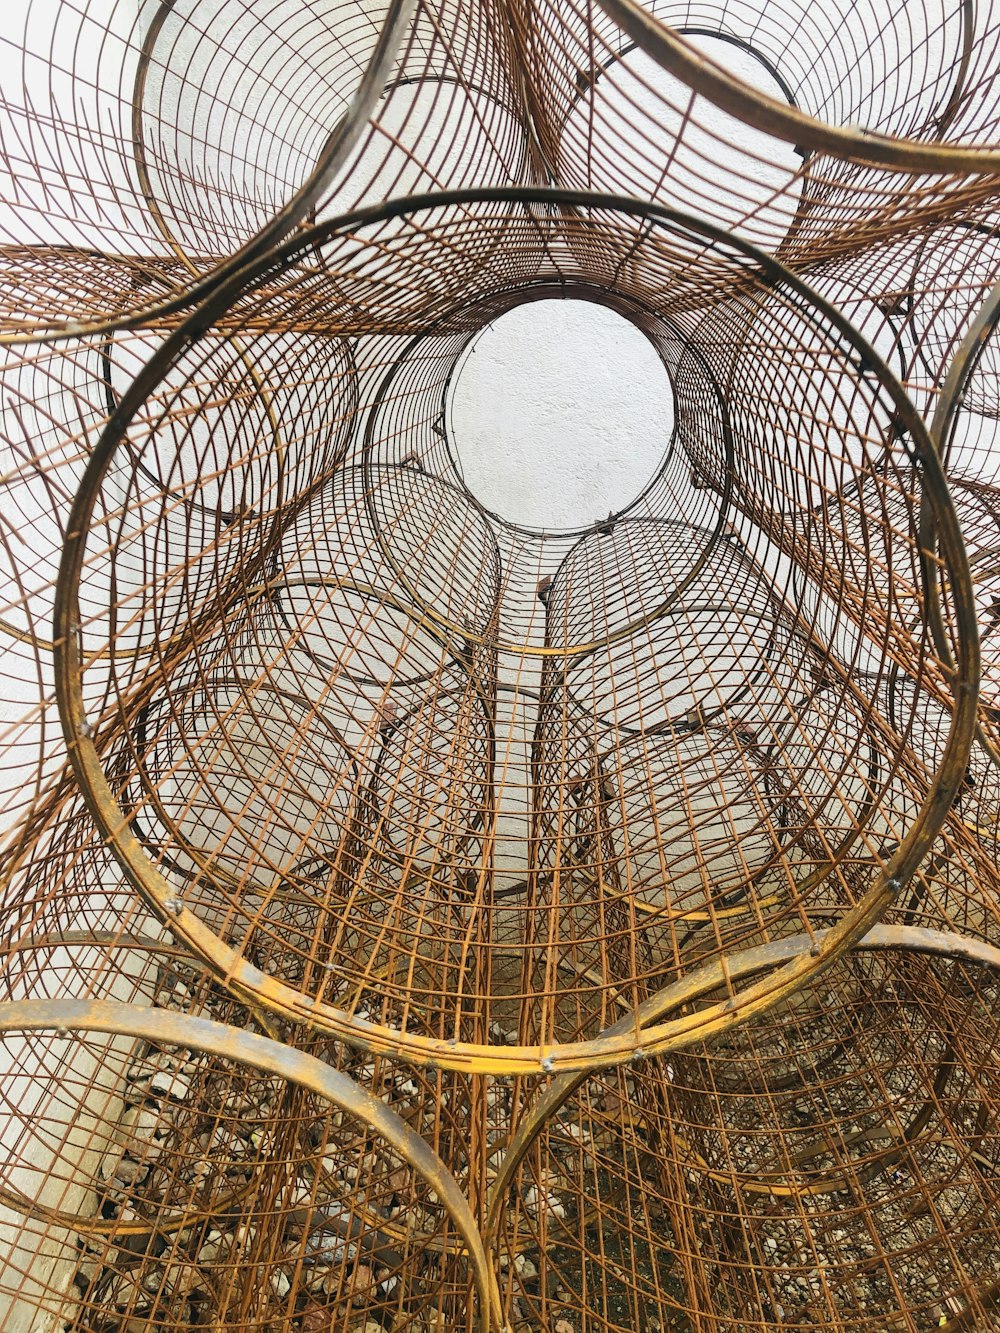 a bunch of wire baskets stacked on top of each other